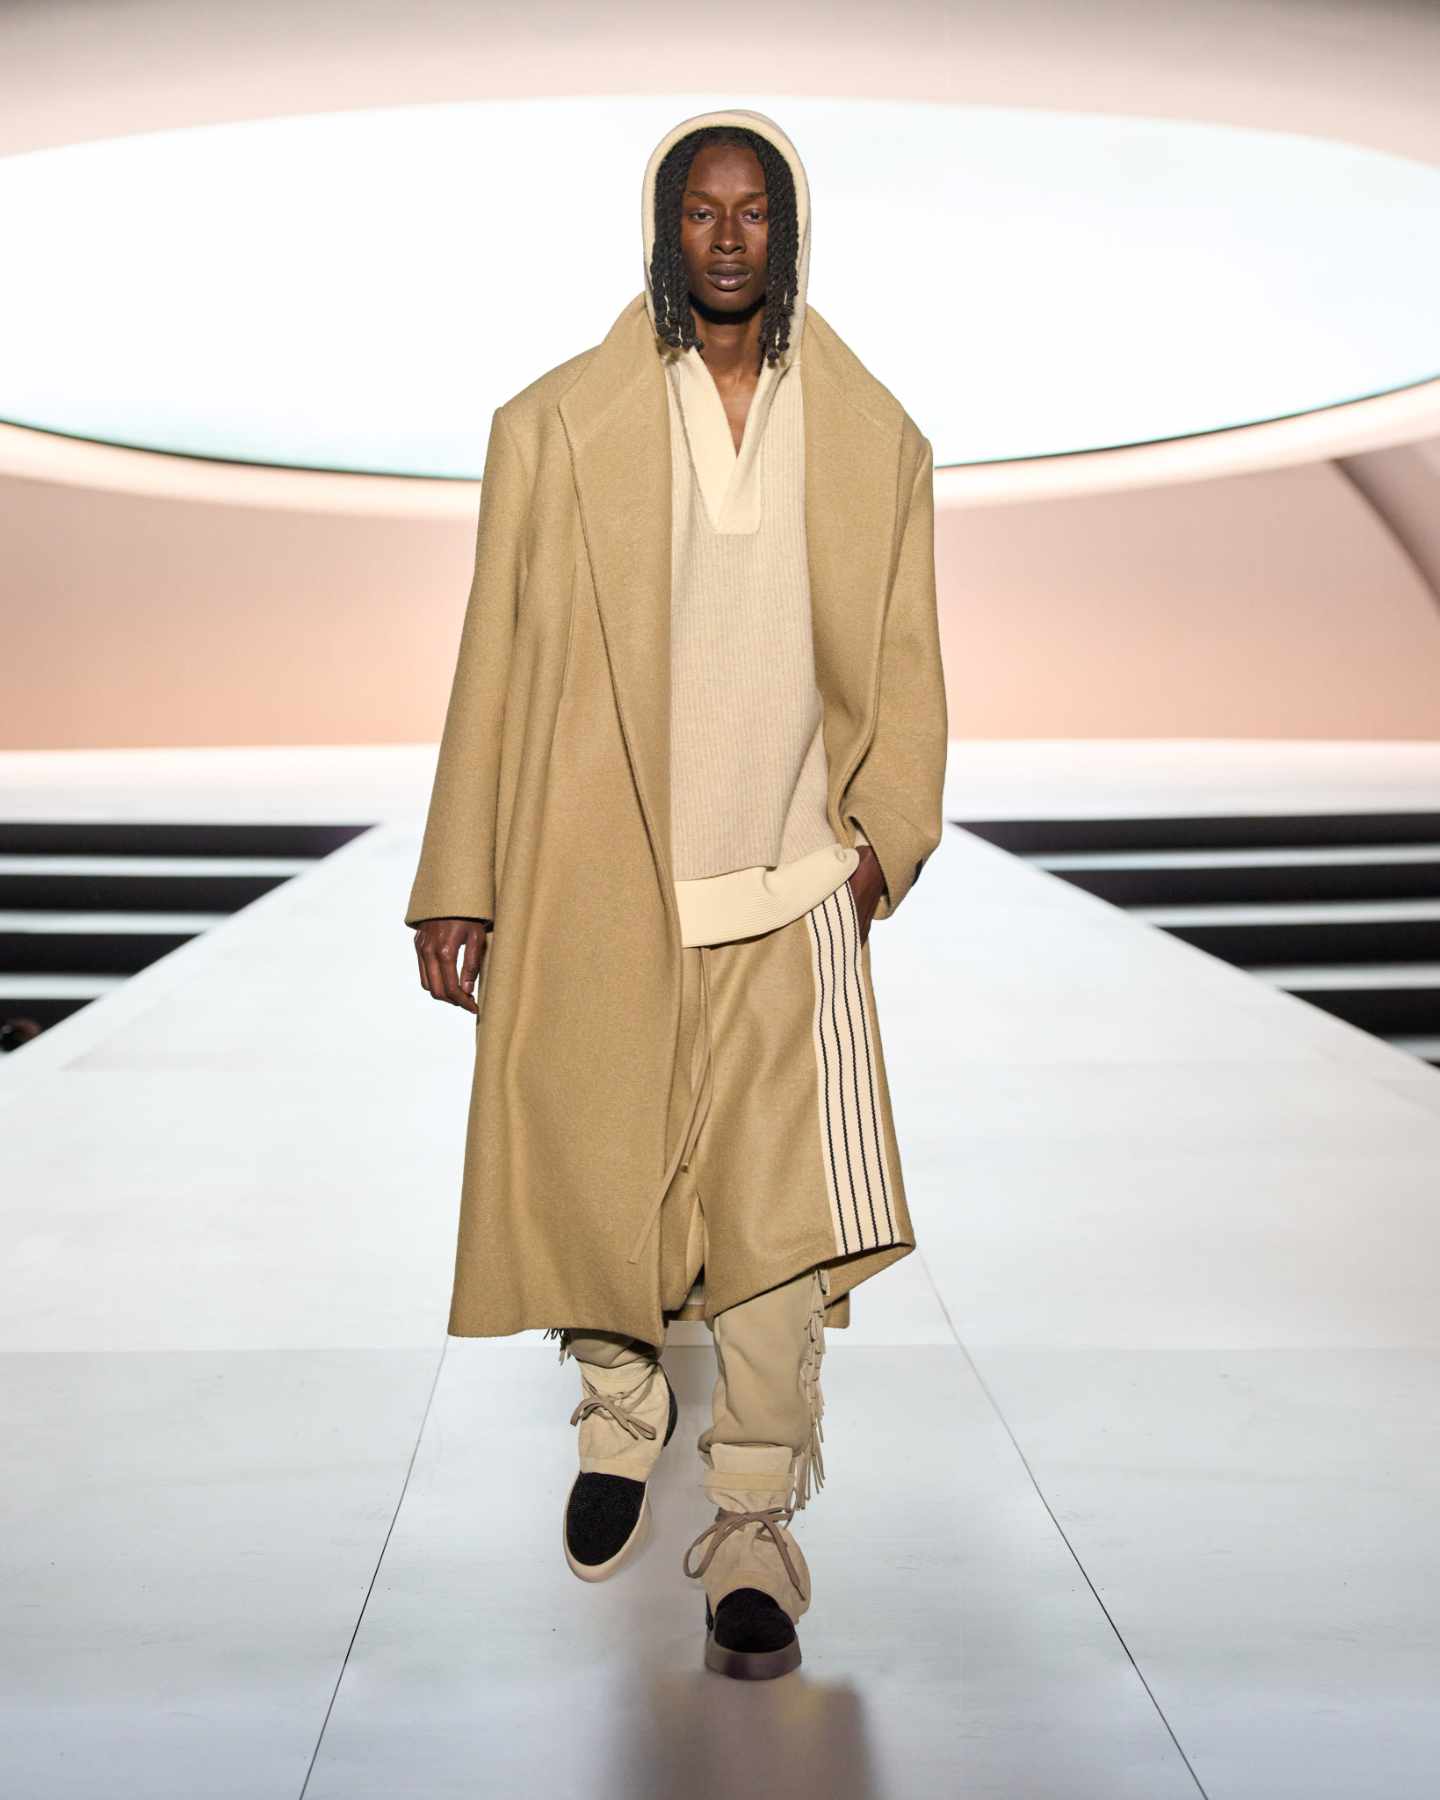 Fear of God and adidas' FOG Athletics collection seen on the runway